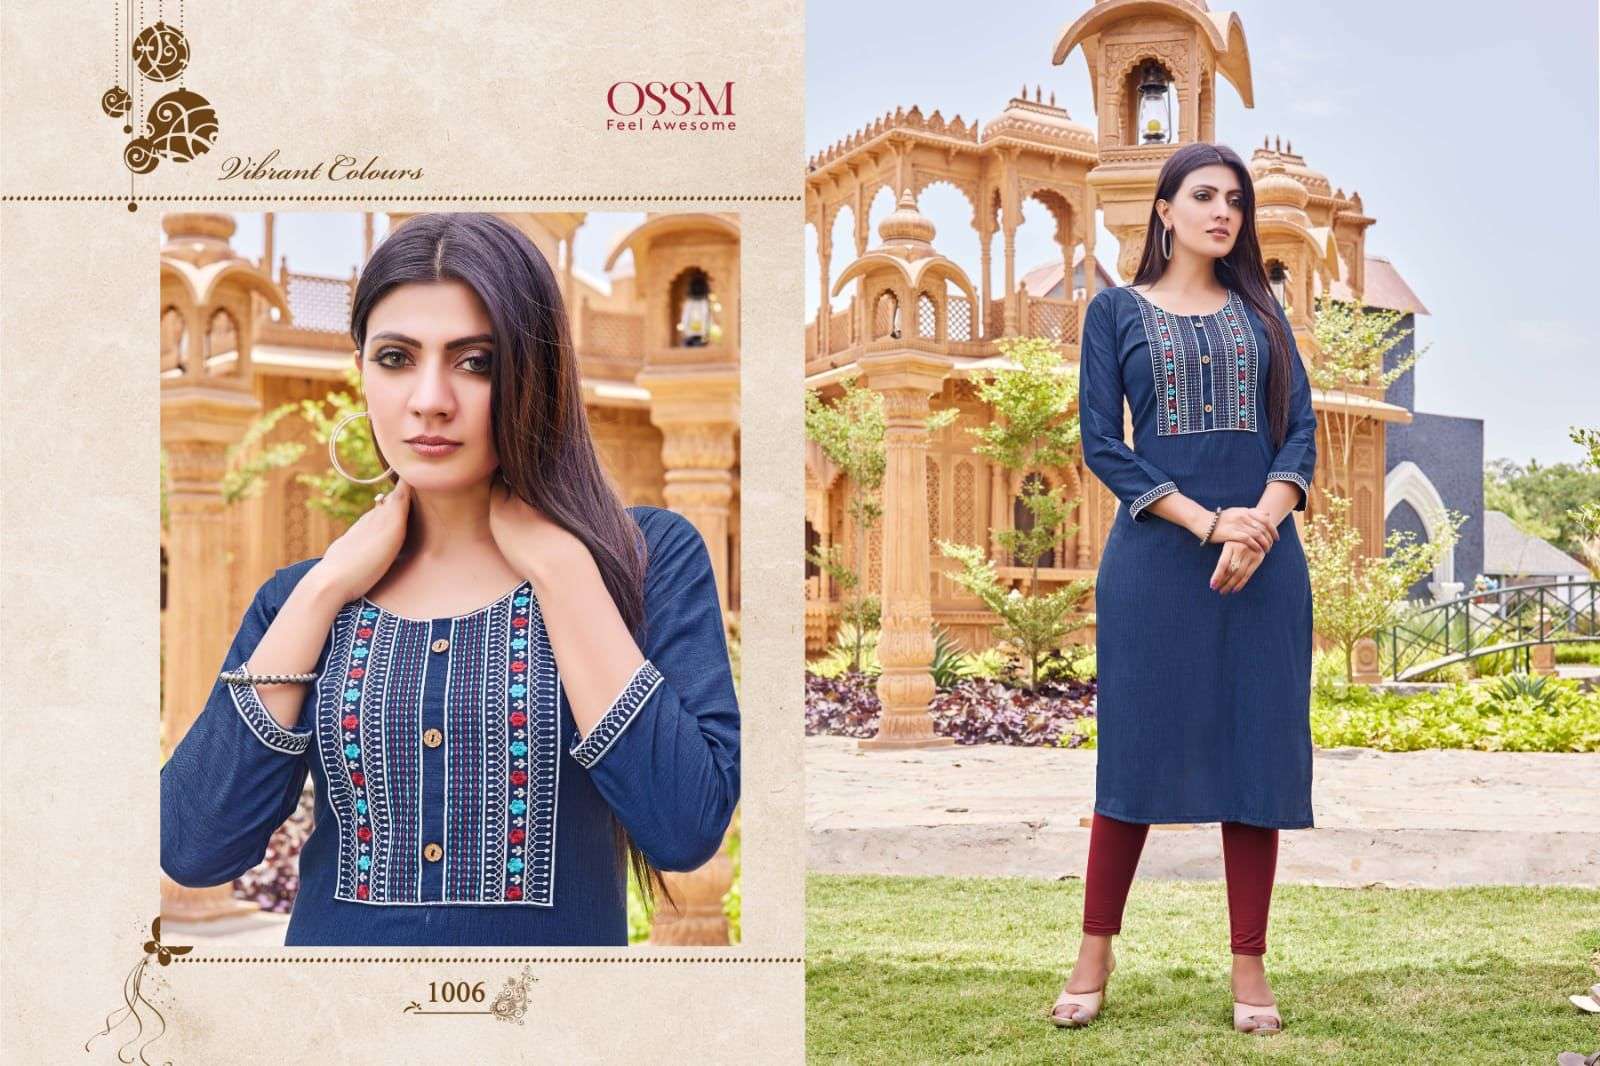 SUN SHINE VOL-2 BY OSSM 1001 TO 1006 SERIES DESIGNER STYLISH FANCY COLORFUL BEAUTIFUL PARTY WEAR & ETHNIC WEAR COLLECTION FANCY KURTIS AT WHOLESALE PRICE